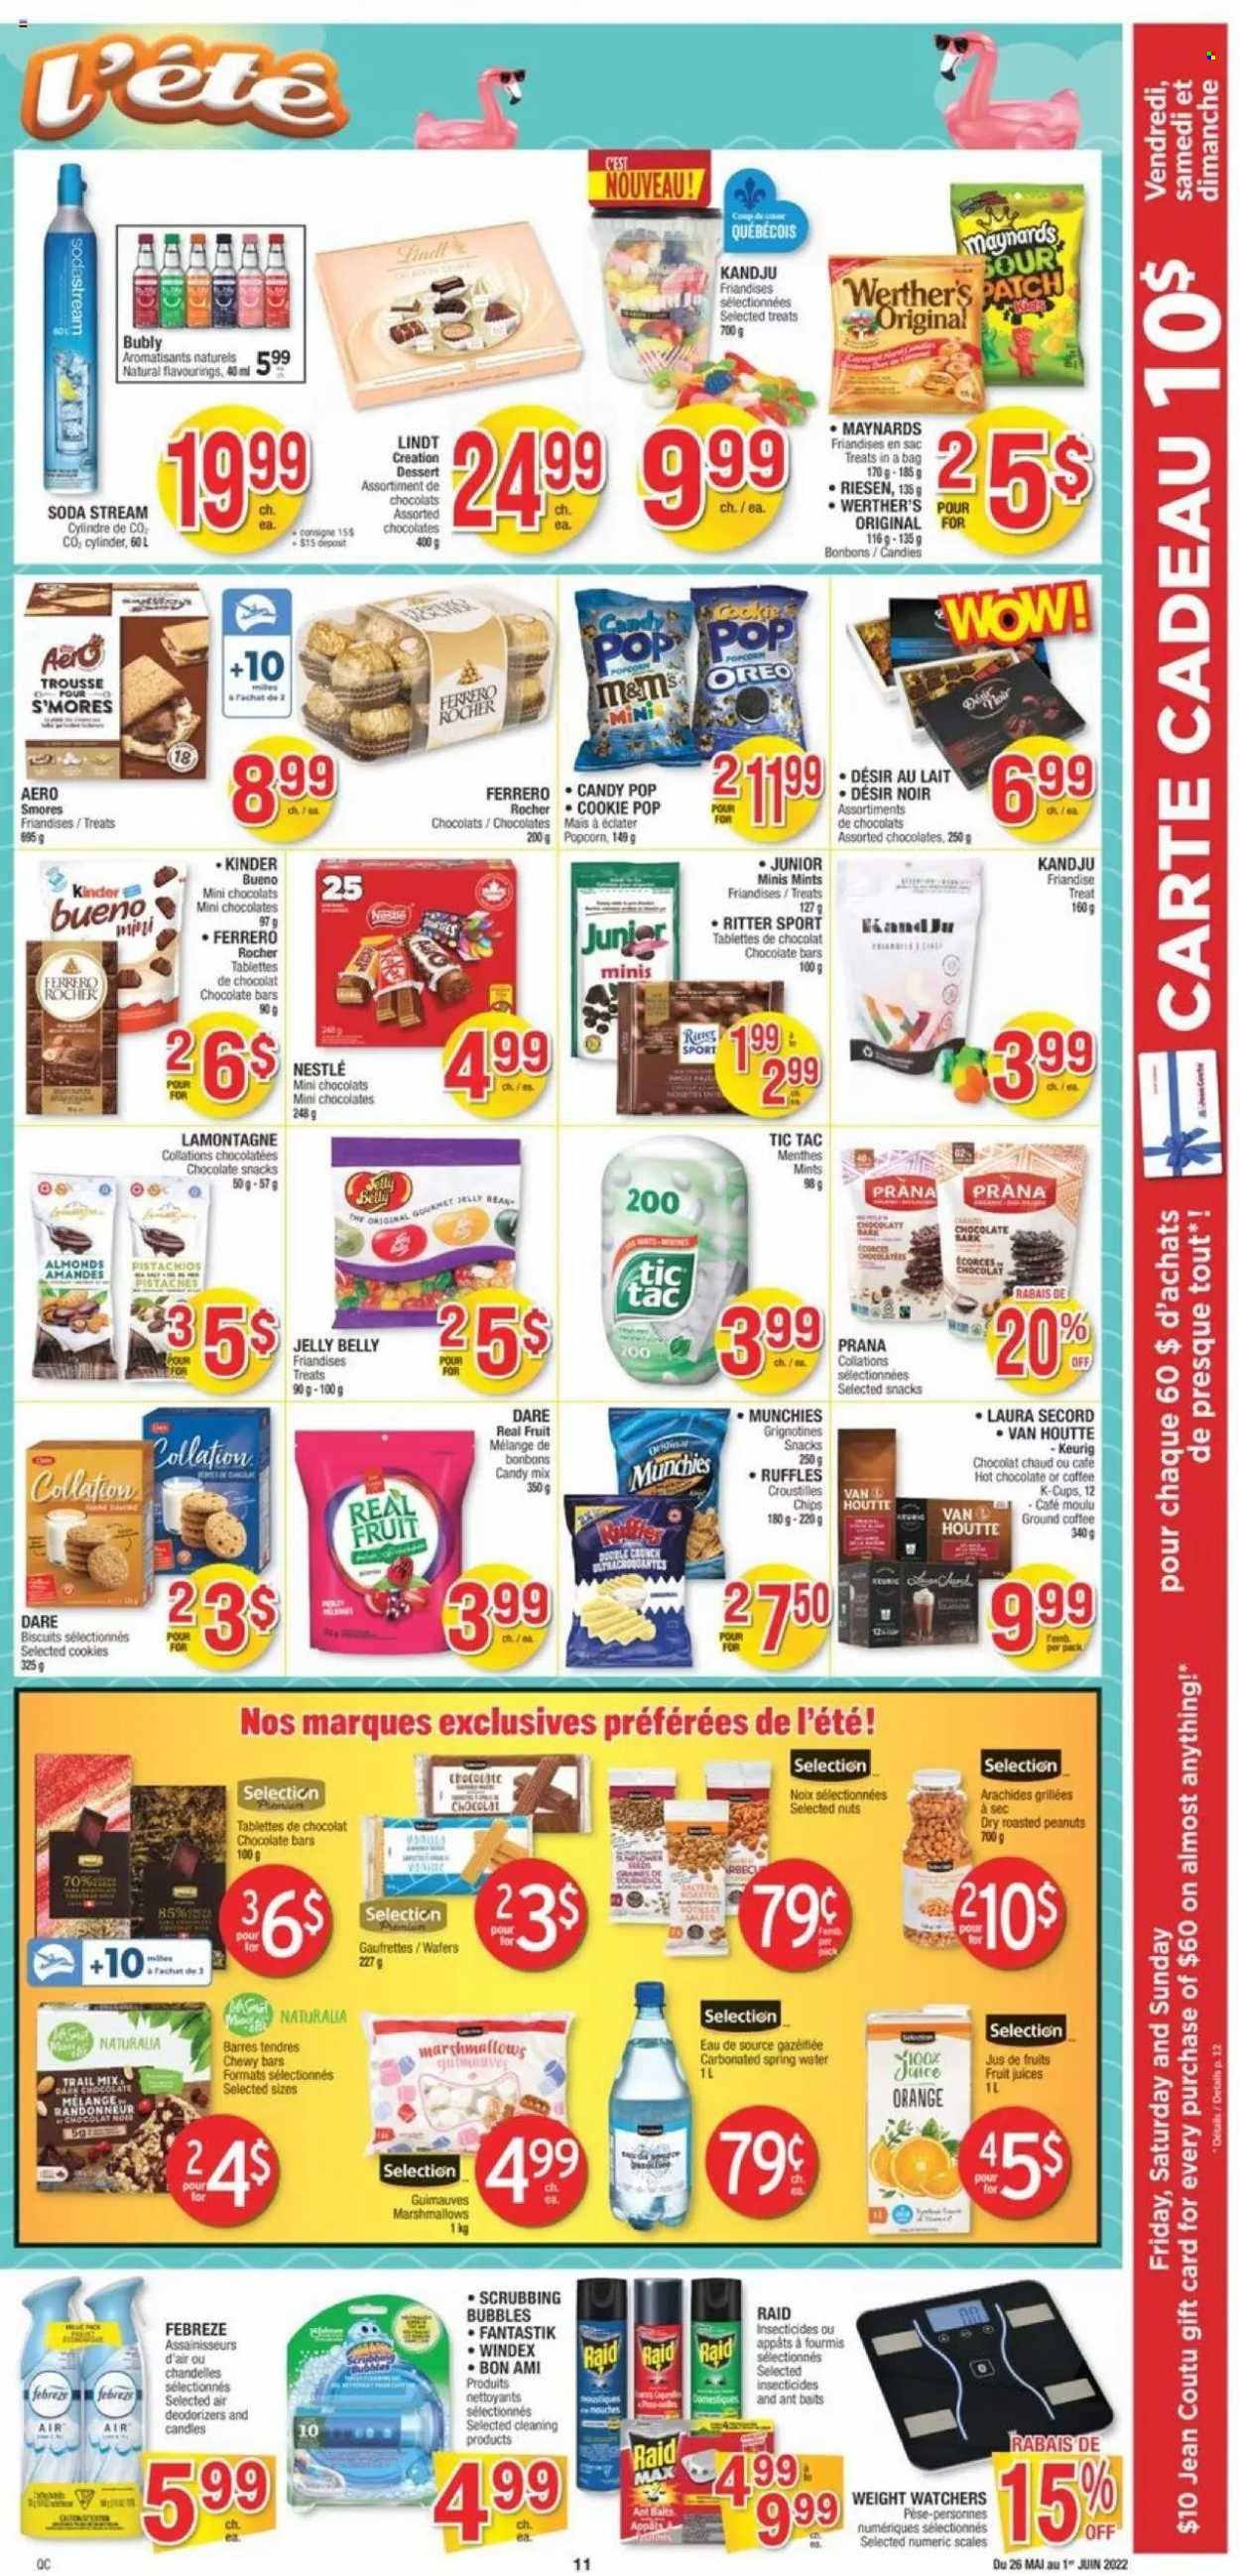 Jean Coutu flyer  - May 26, 2022 - June 01, 2022.